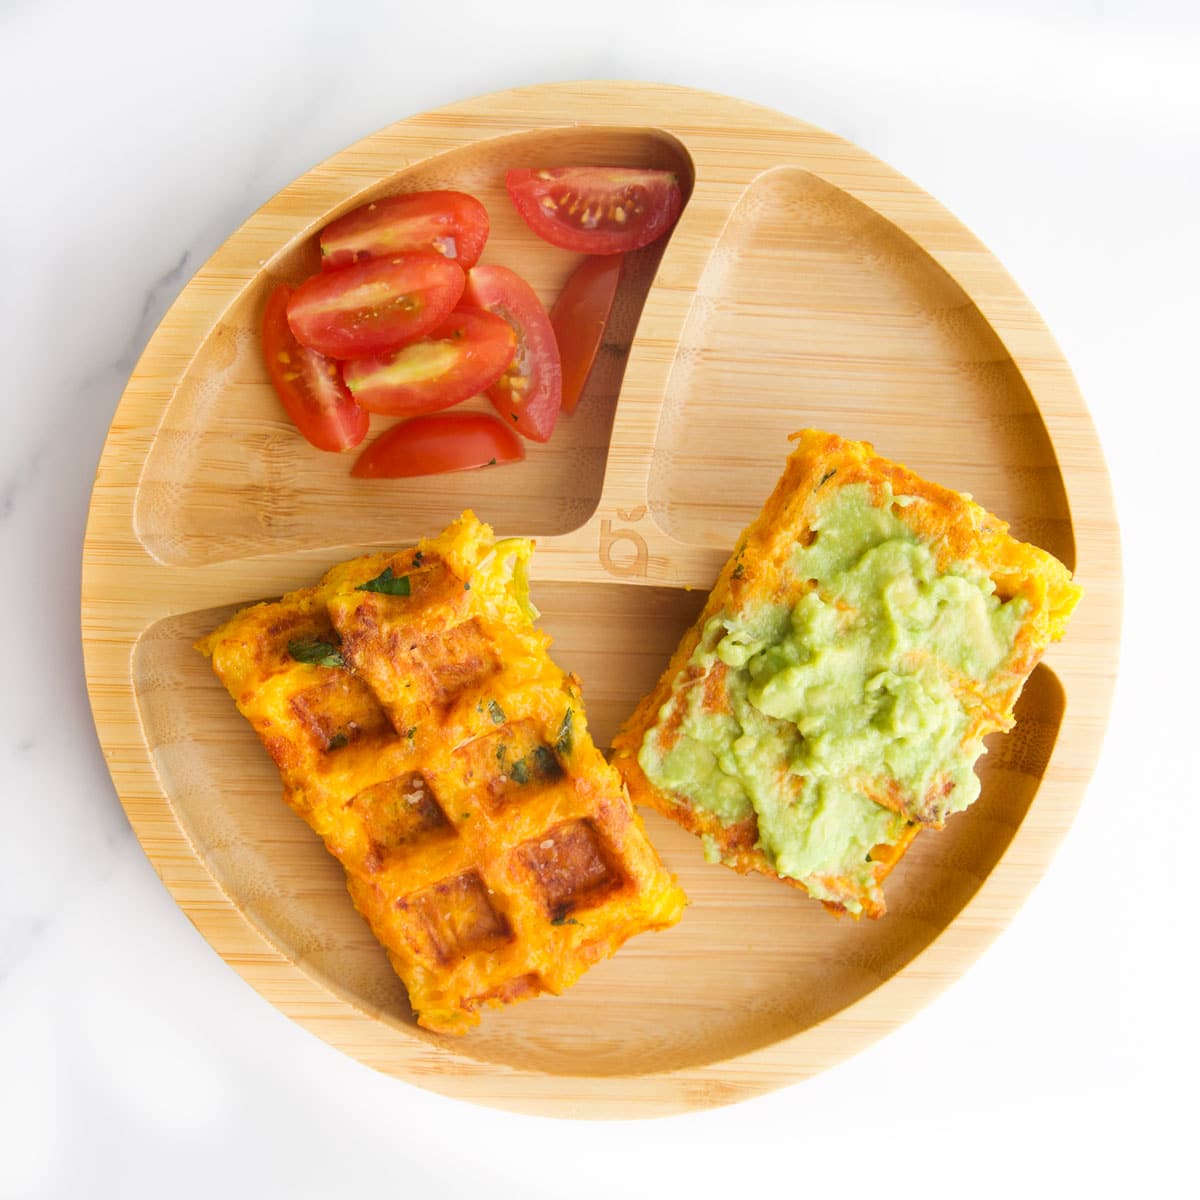 Savoury Waffles Cut into Fingers on Baby Plate Served with Mashed Avocado and Chopped Tomato.